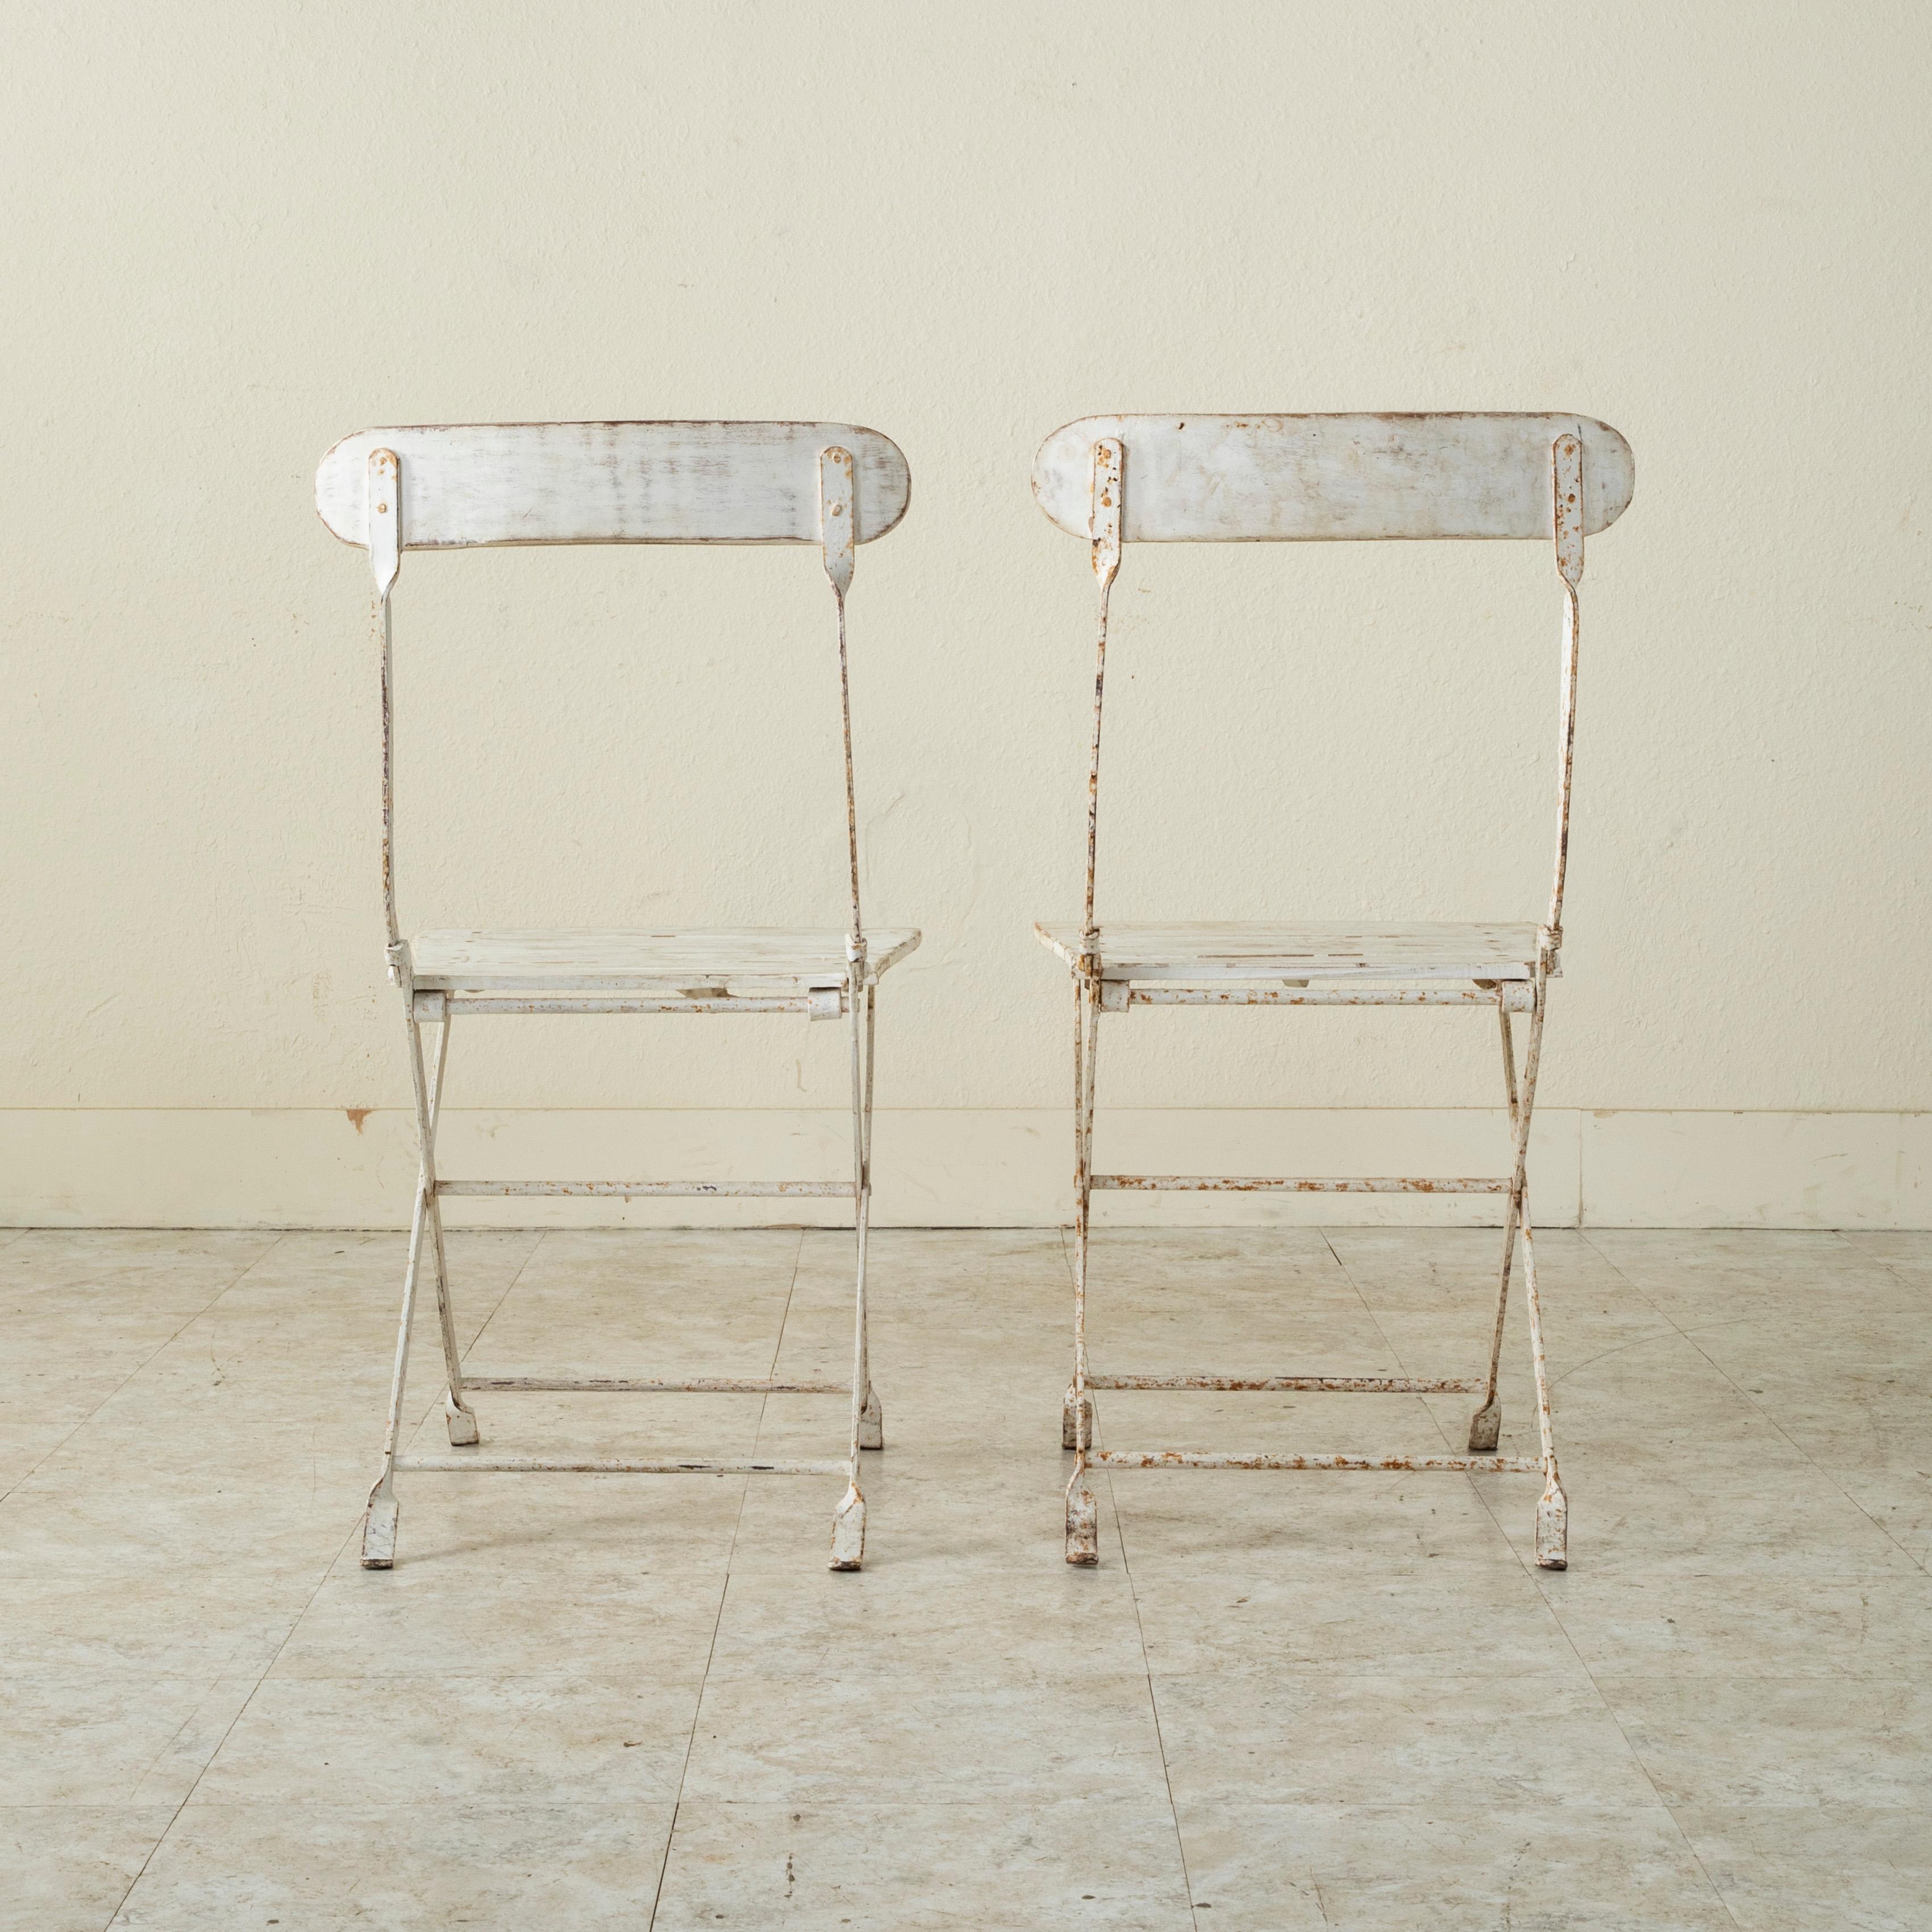 Midcentury French White Painted Iron and Ash Folding Garden Chairs, in Pairs For Sale 1